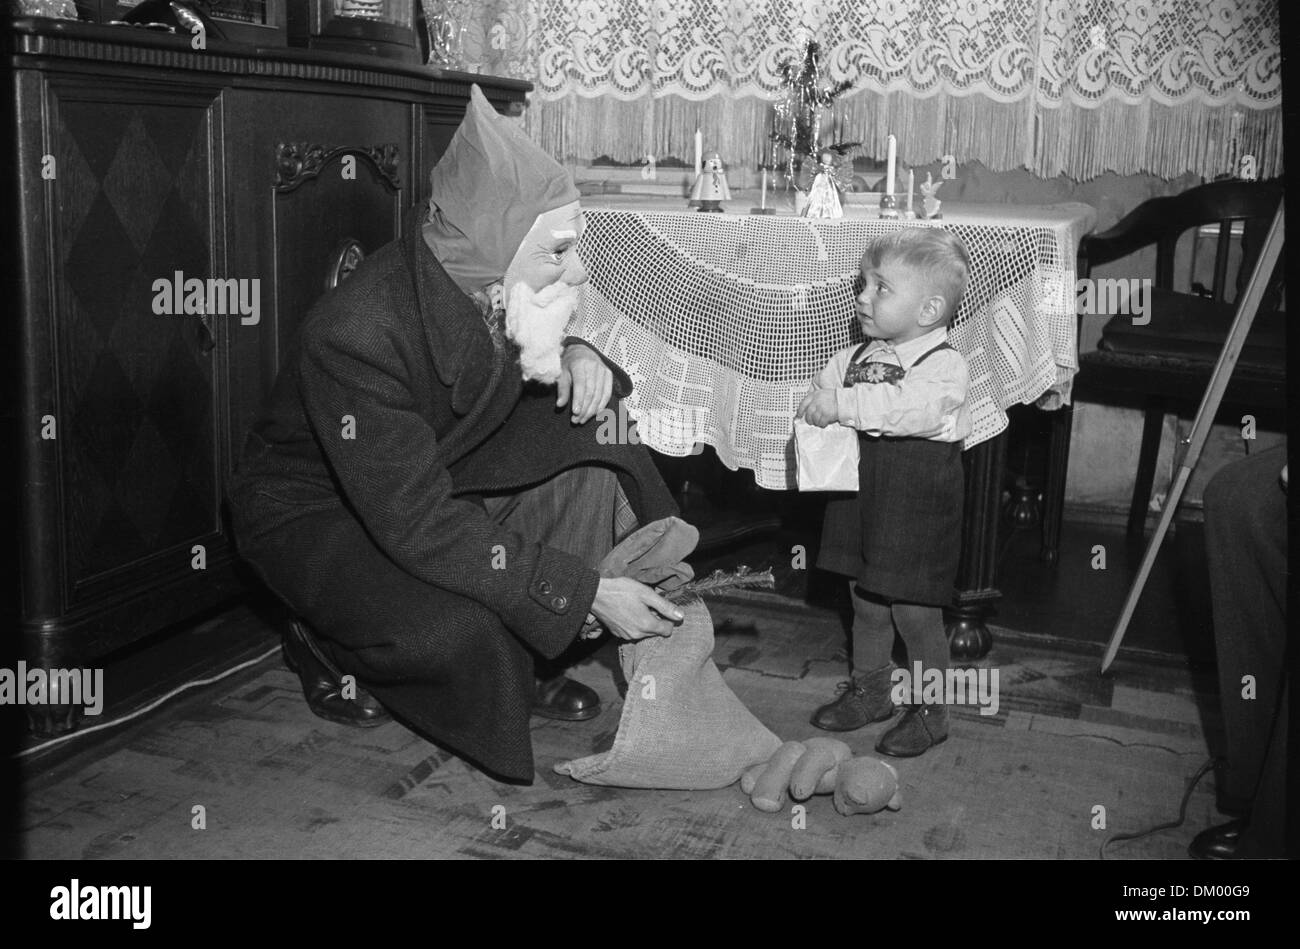 A small boy is pictured with Santa Claus on Christmas Eve in 1951. Photo: Deutsche Fotothek/Rössing Stock Photo